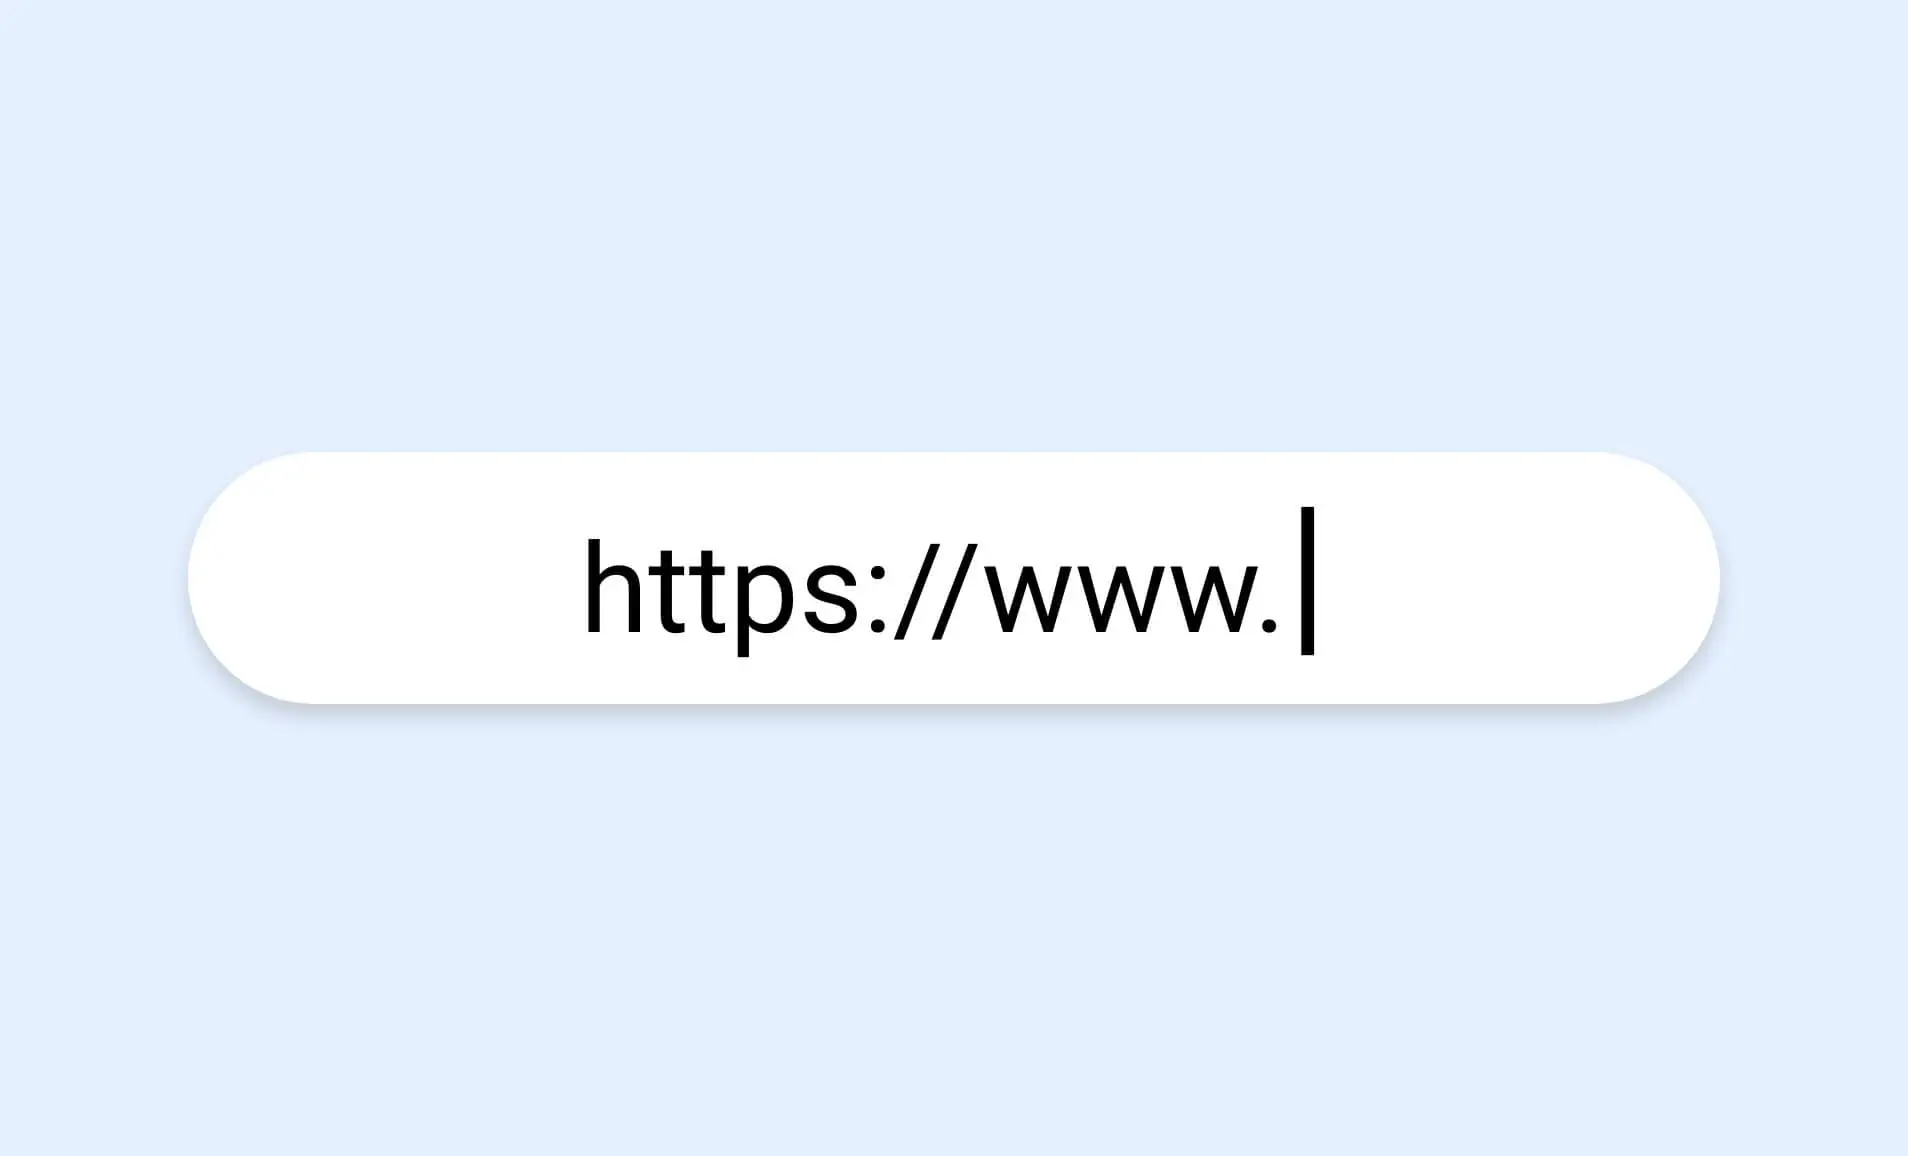 web url app interface with option to type in any url that needs to be displayed on digital signage screen